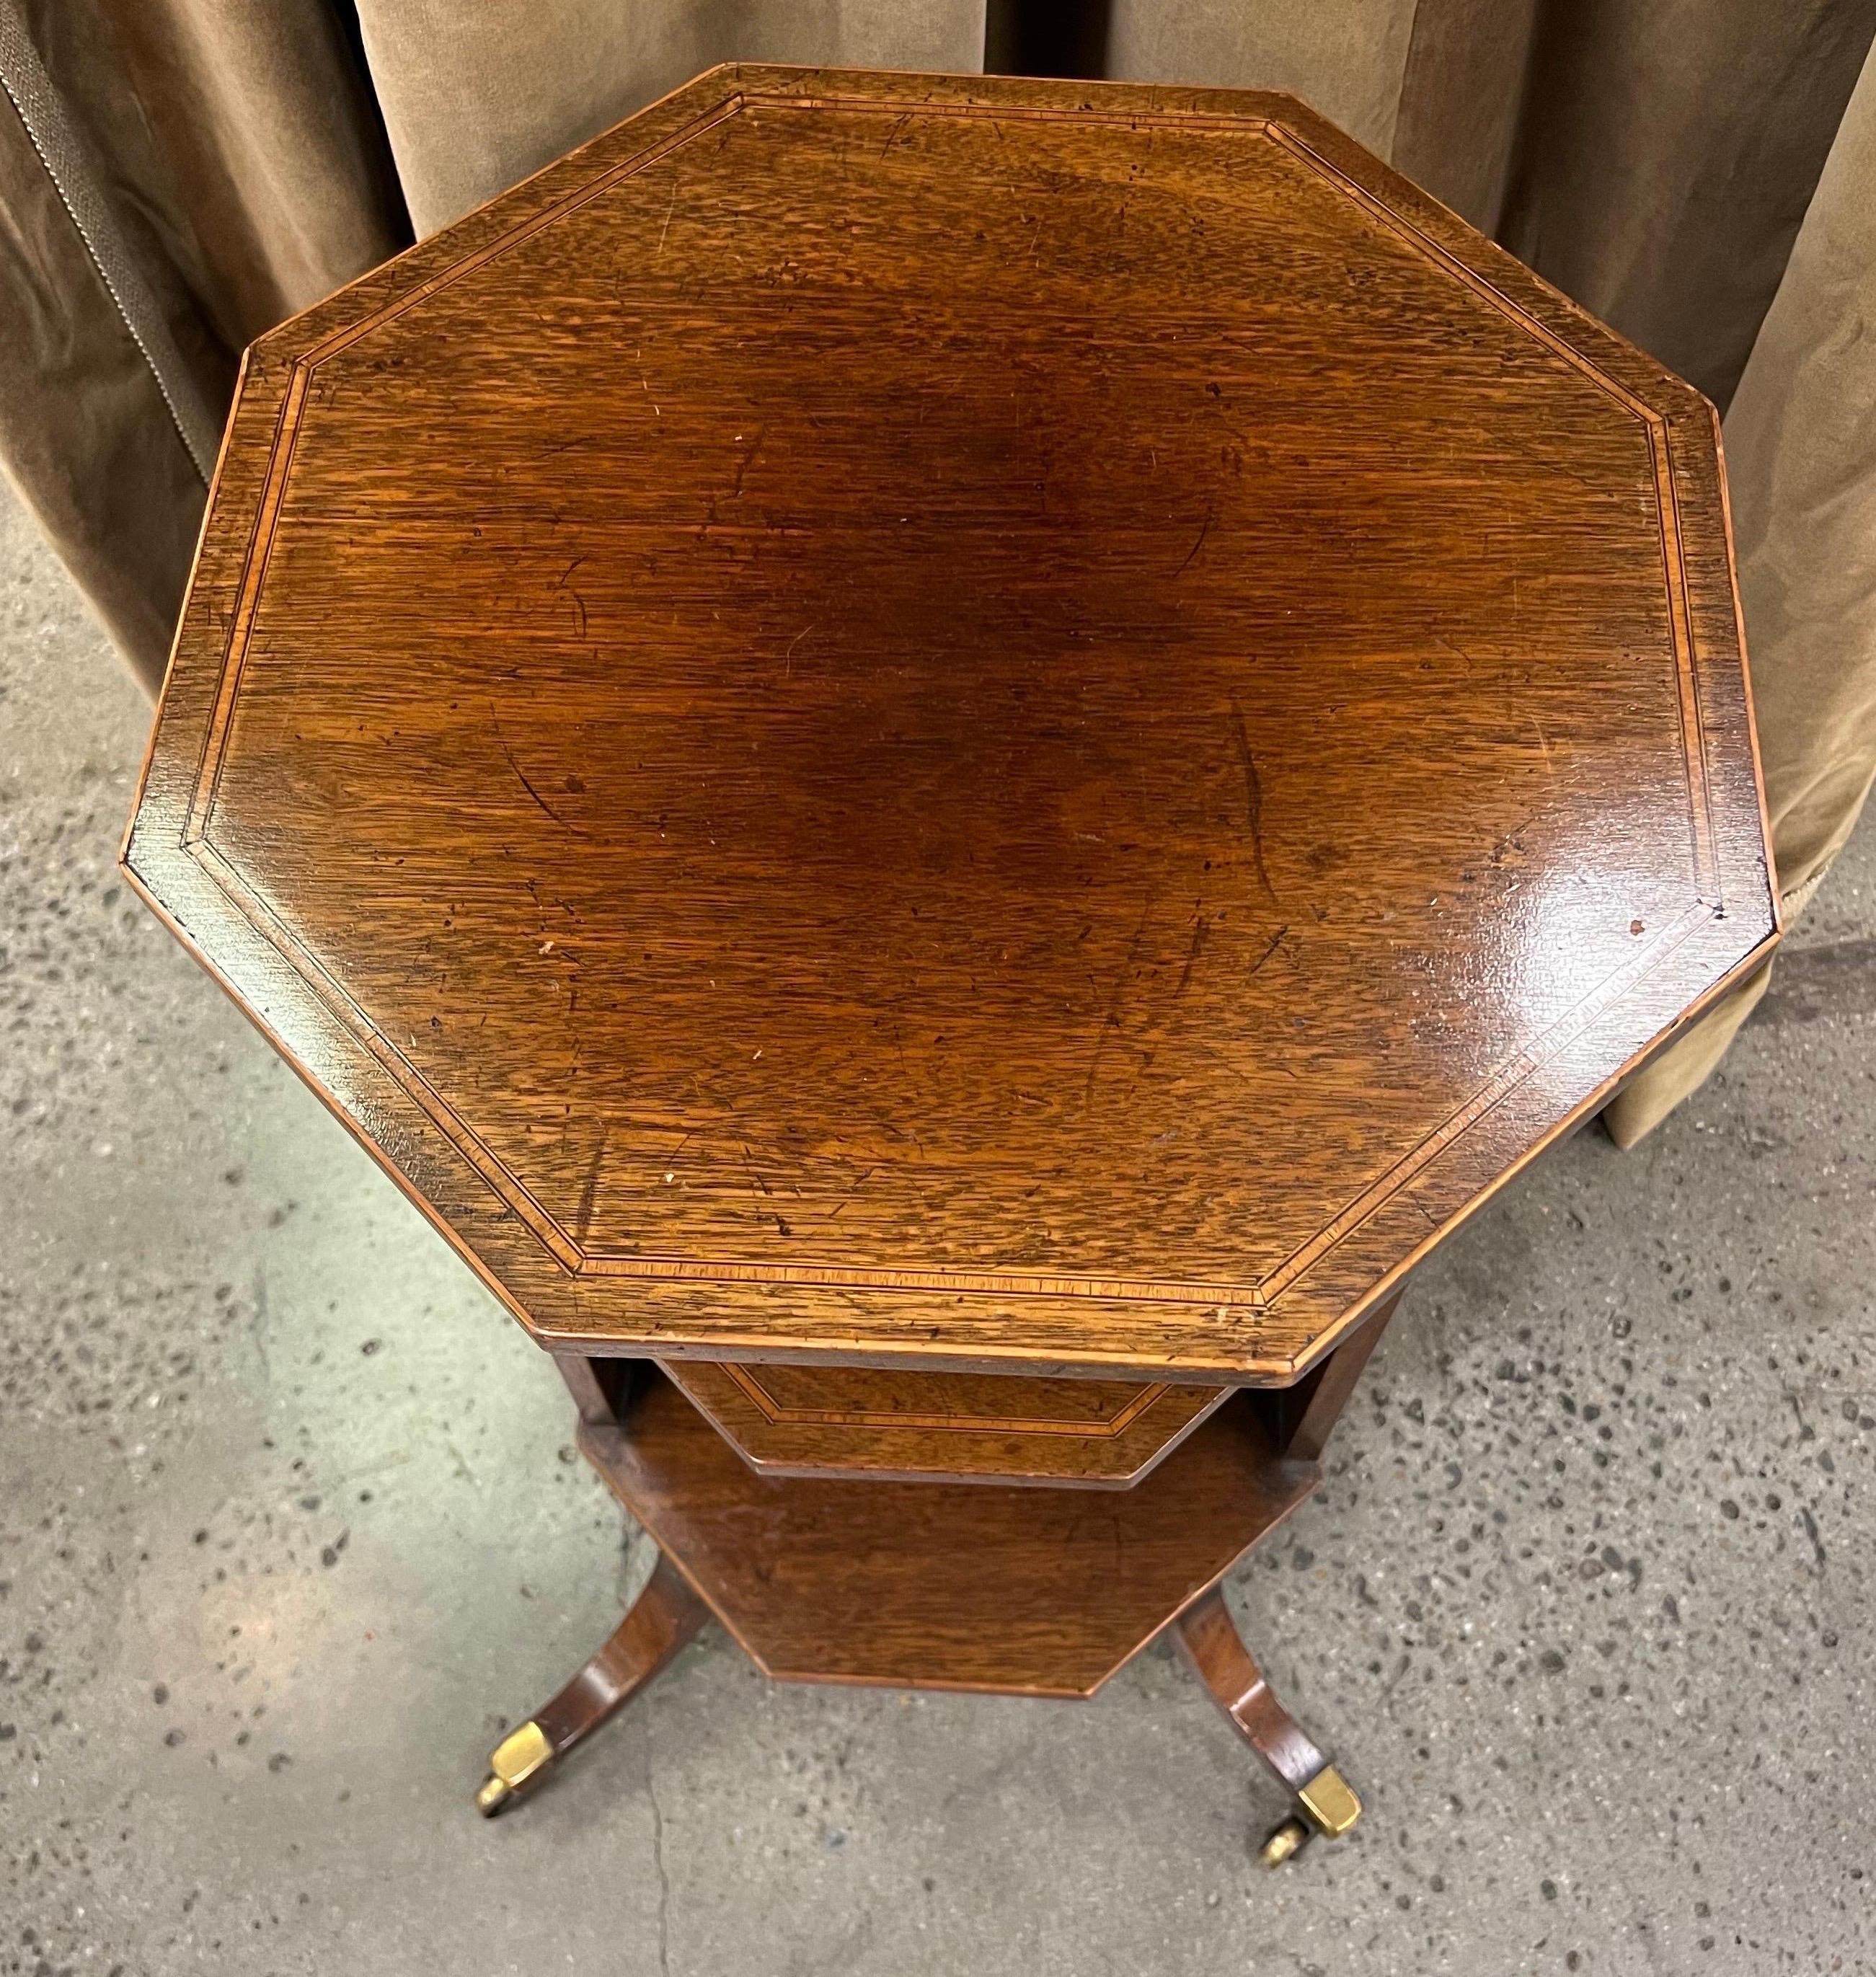 19th Century English Regency Inlaid Mahogany Side Table In Good Condition For Sale In Charleston, SC